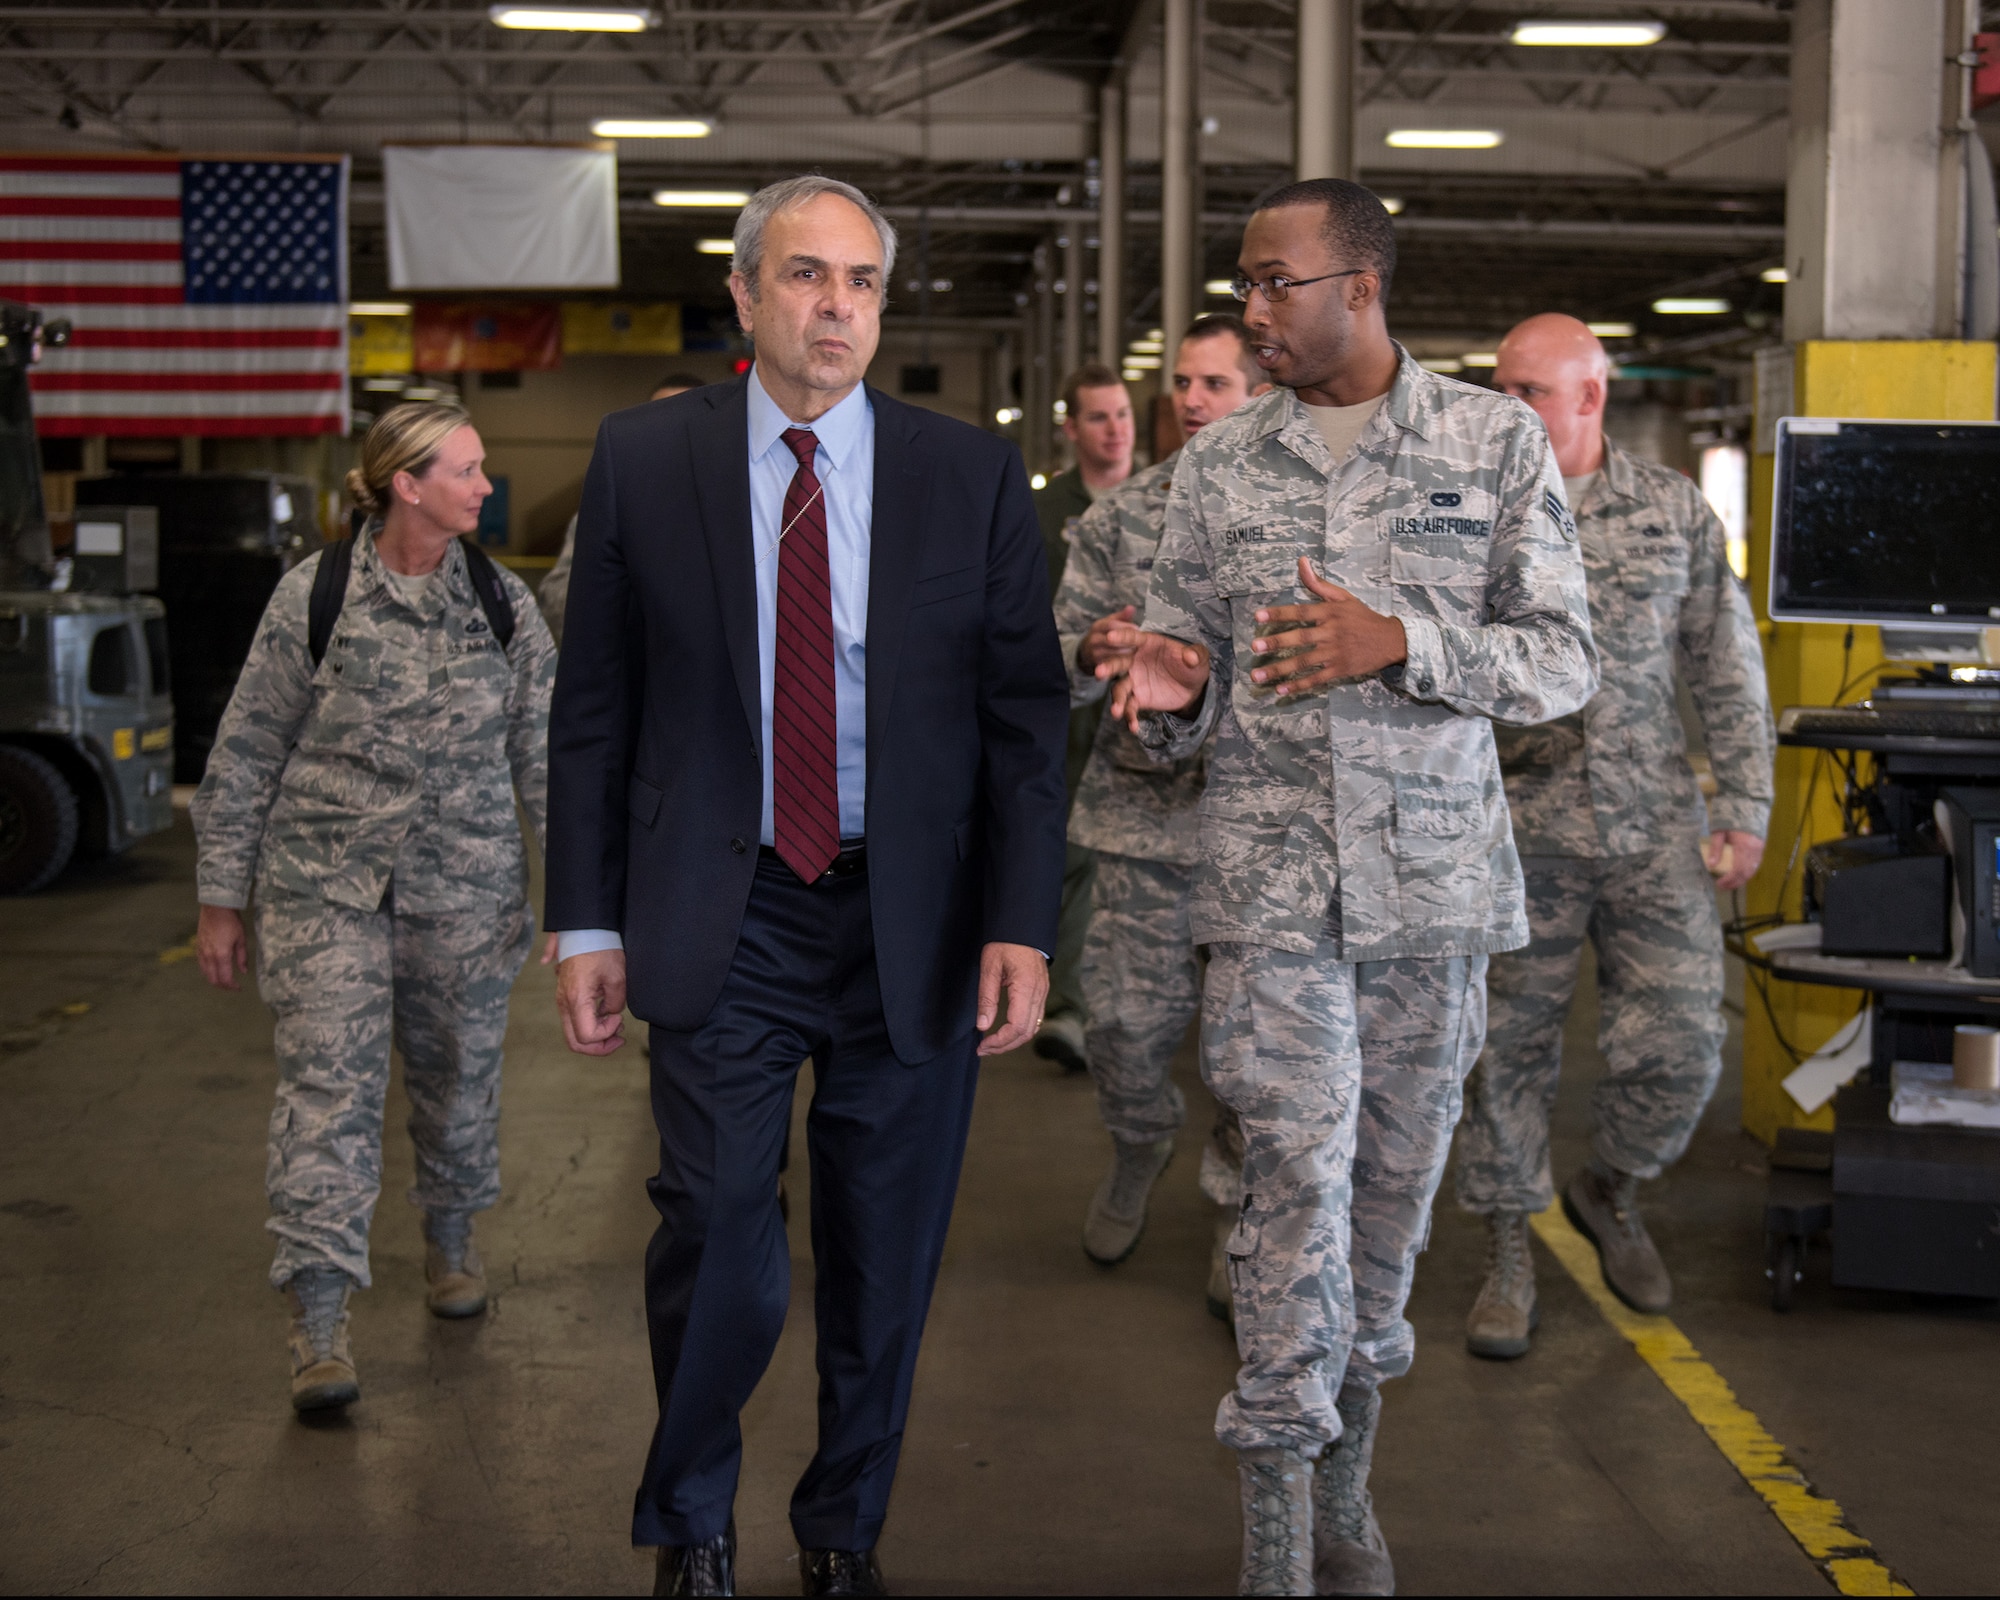 U.S. Air Force Senior Airman Michael Samuel, 60th Aerial Port Squadron gives a briefing to Dr. Richard Joseph, Chief Scientist of the United States Air Force, Washington, D.C., during his visit to Travis Air Force Base, Calif., July 12, 2018. Joseph toured David Grant USAF Medical Center, Phoenix Spark lab and visited with Airmen. Joseph serves as the chief scientific adviser to the Chief of Staff and Secretary of the AF, and provides assessments on a wide range of scientific and technical issues affecting the AF mission. (U.S. Air Force photo by Louis Briscese)